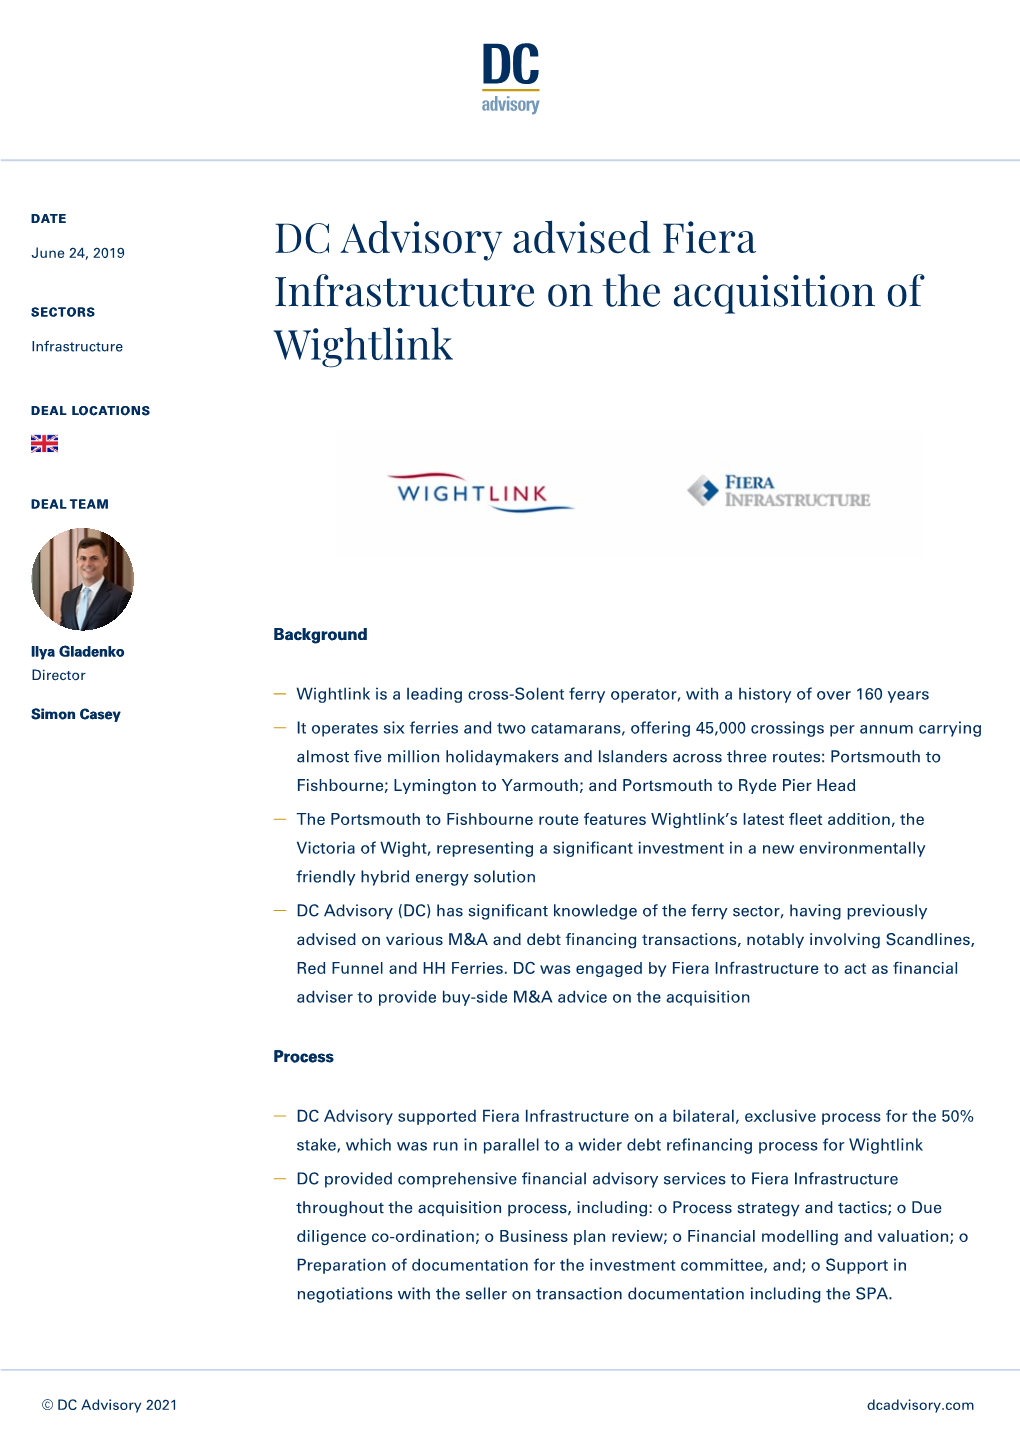 DC Advisory Advised Fiera Infrastructure on the Acquisition Of